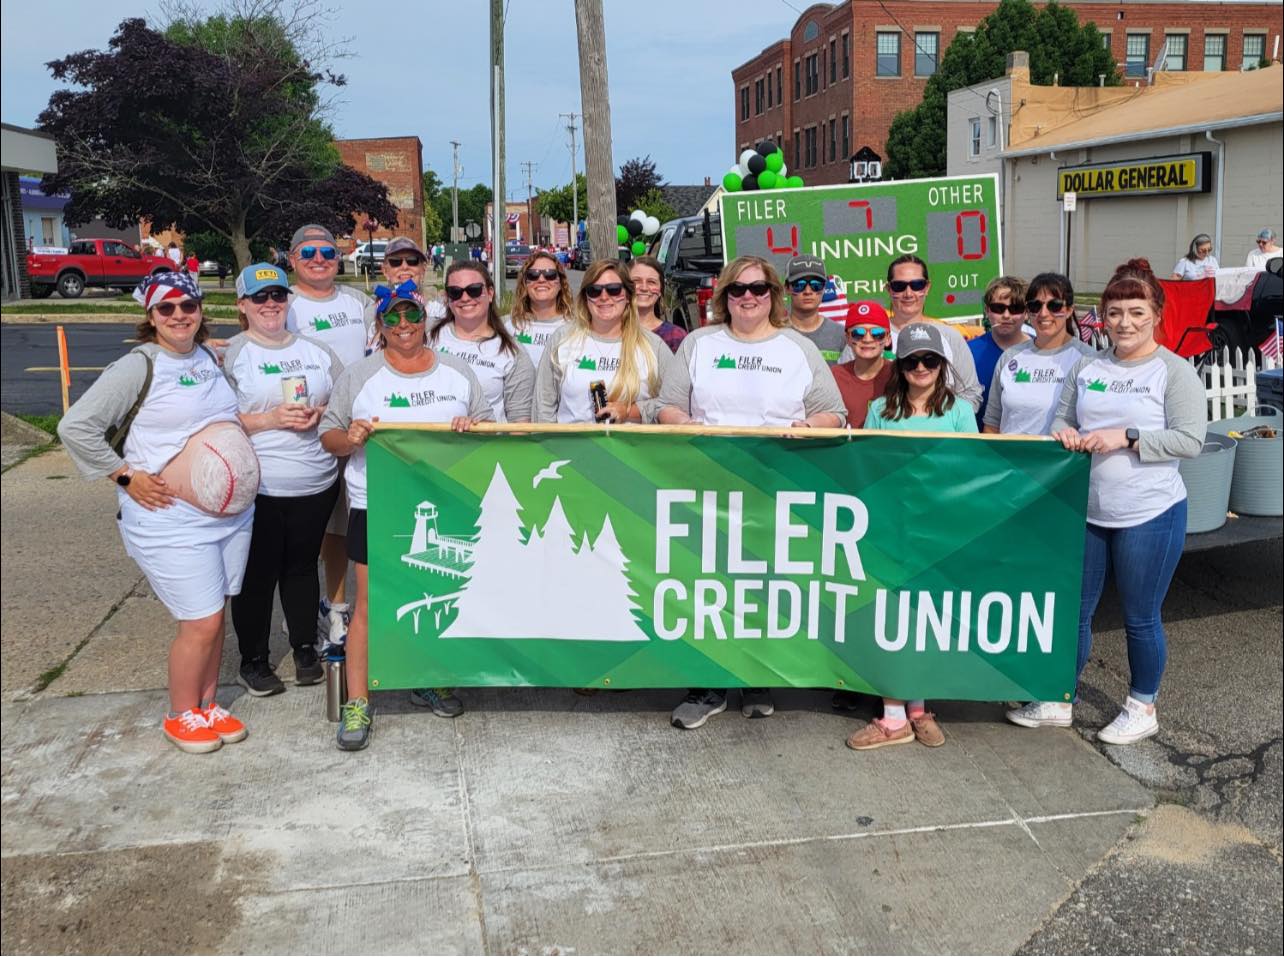 Image of a group of people holding a Filer Credit Union Banner at a festival